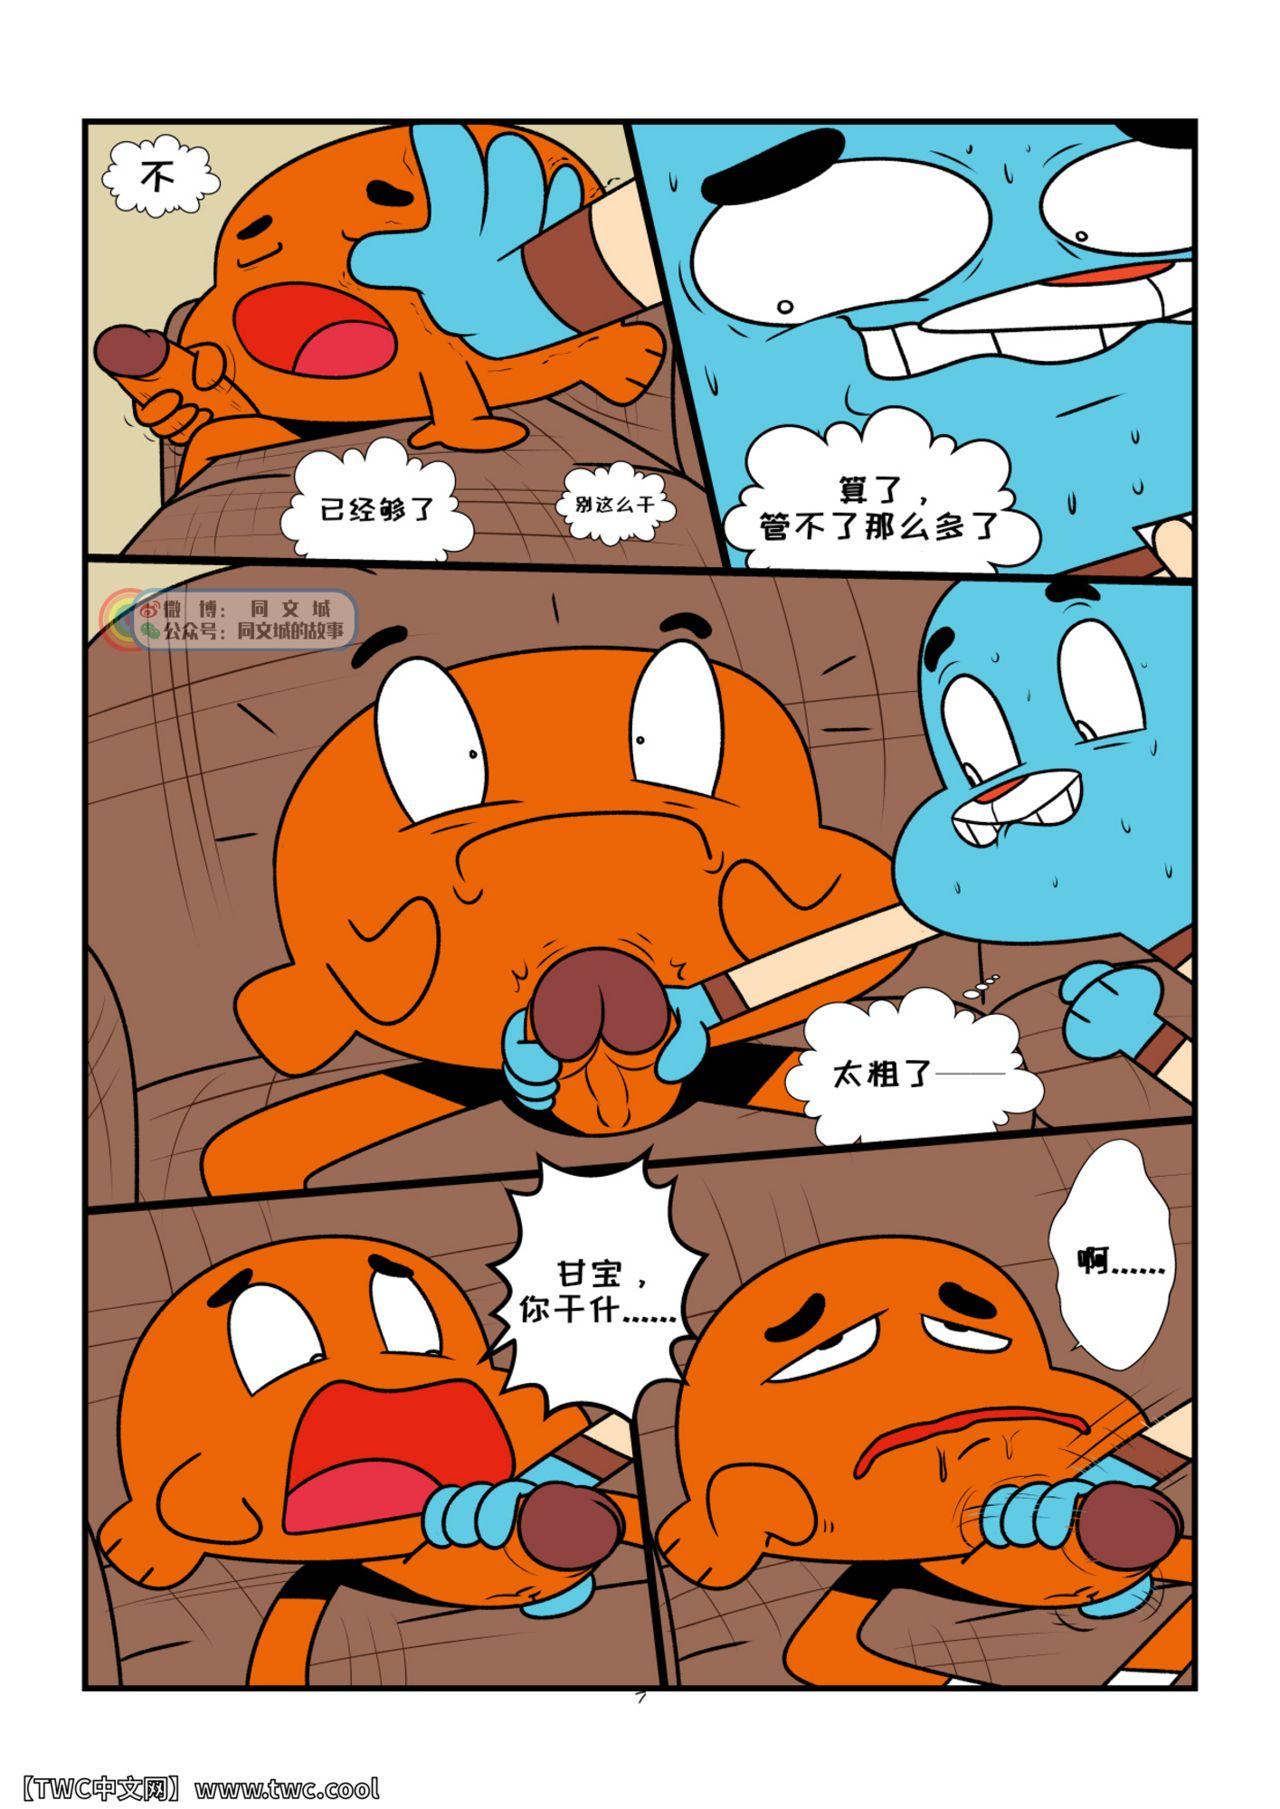 Blowjob The Sexy World Of Gumball - The amazing world of gumball Ruiva - Page 7